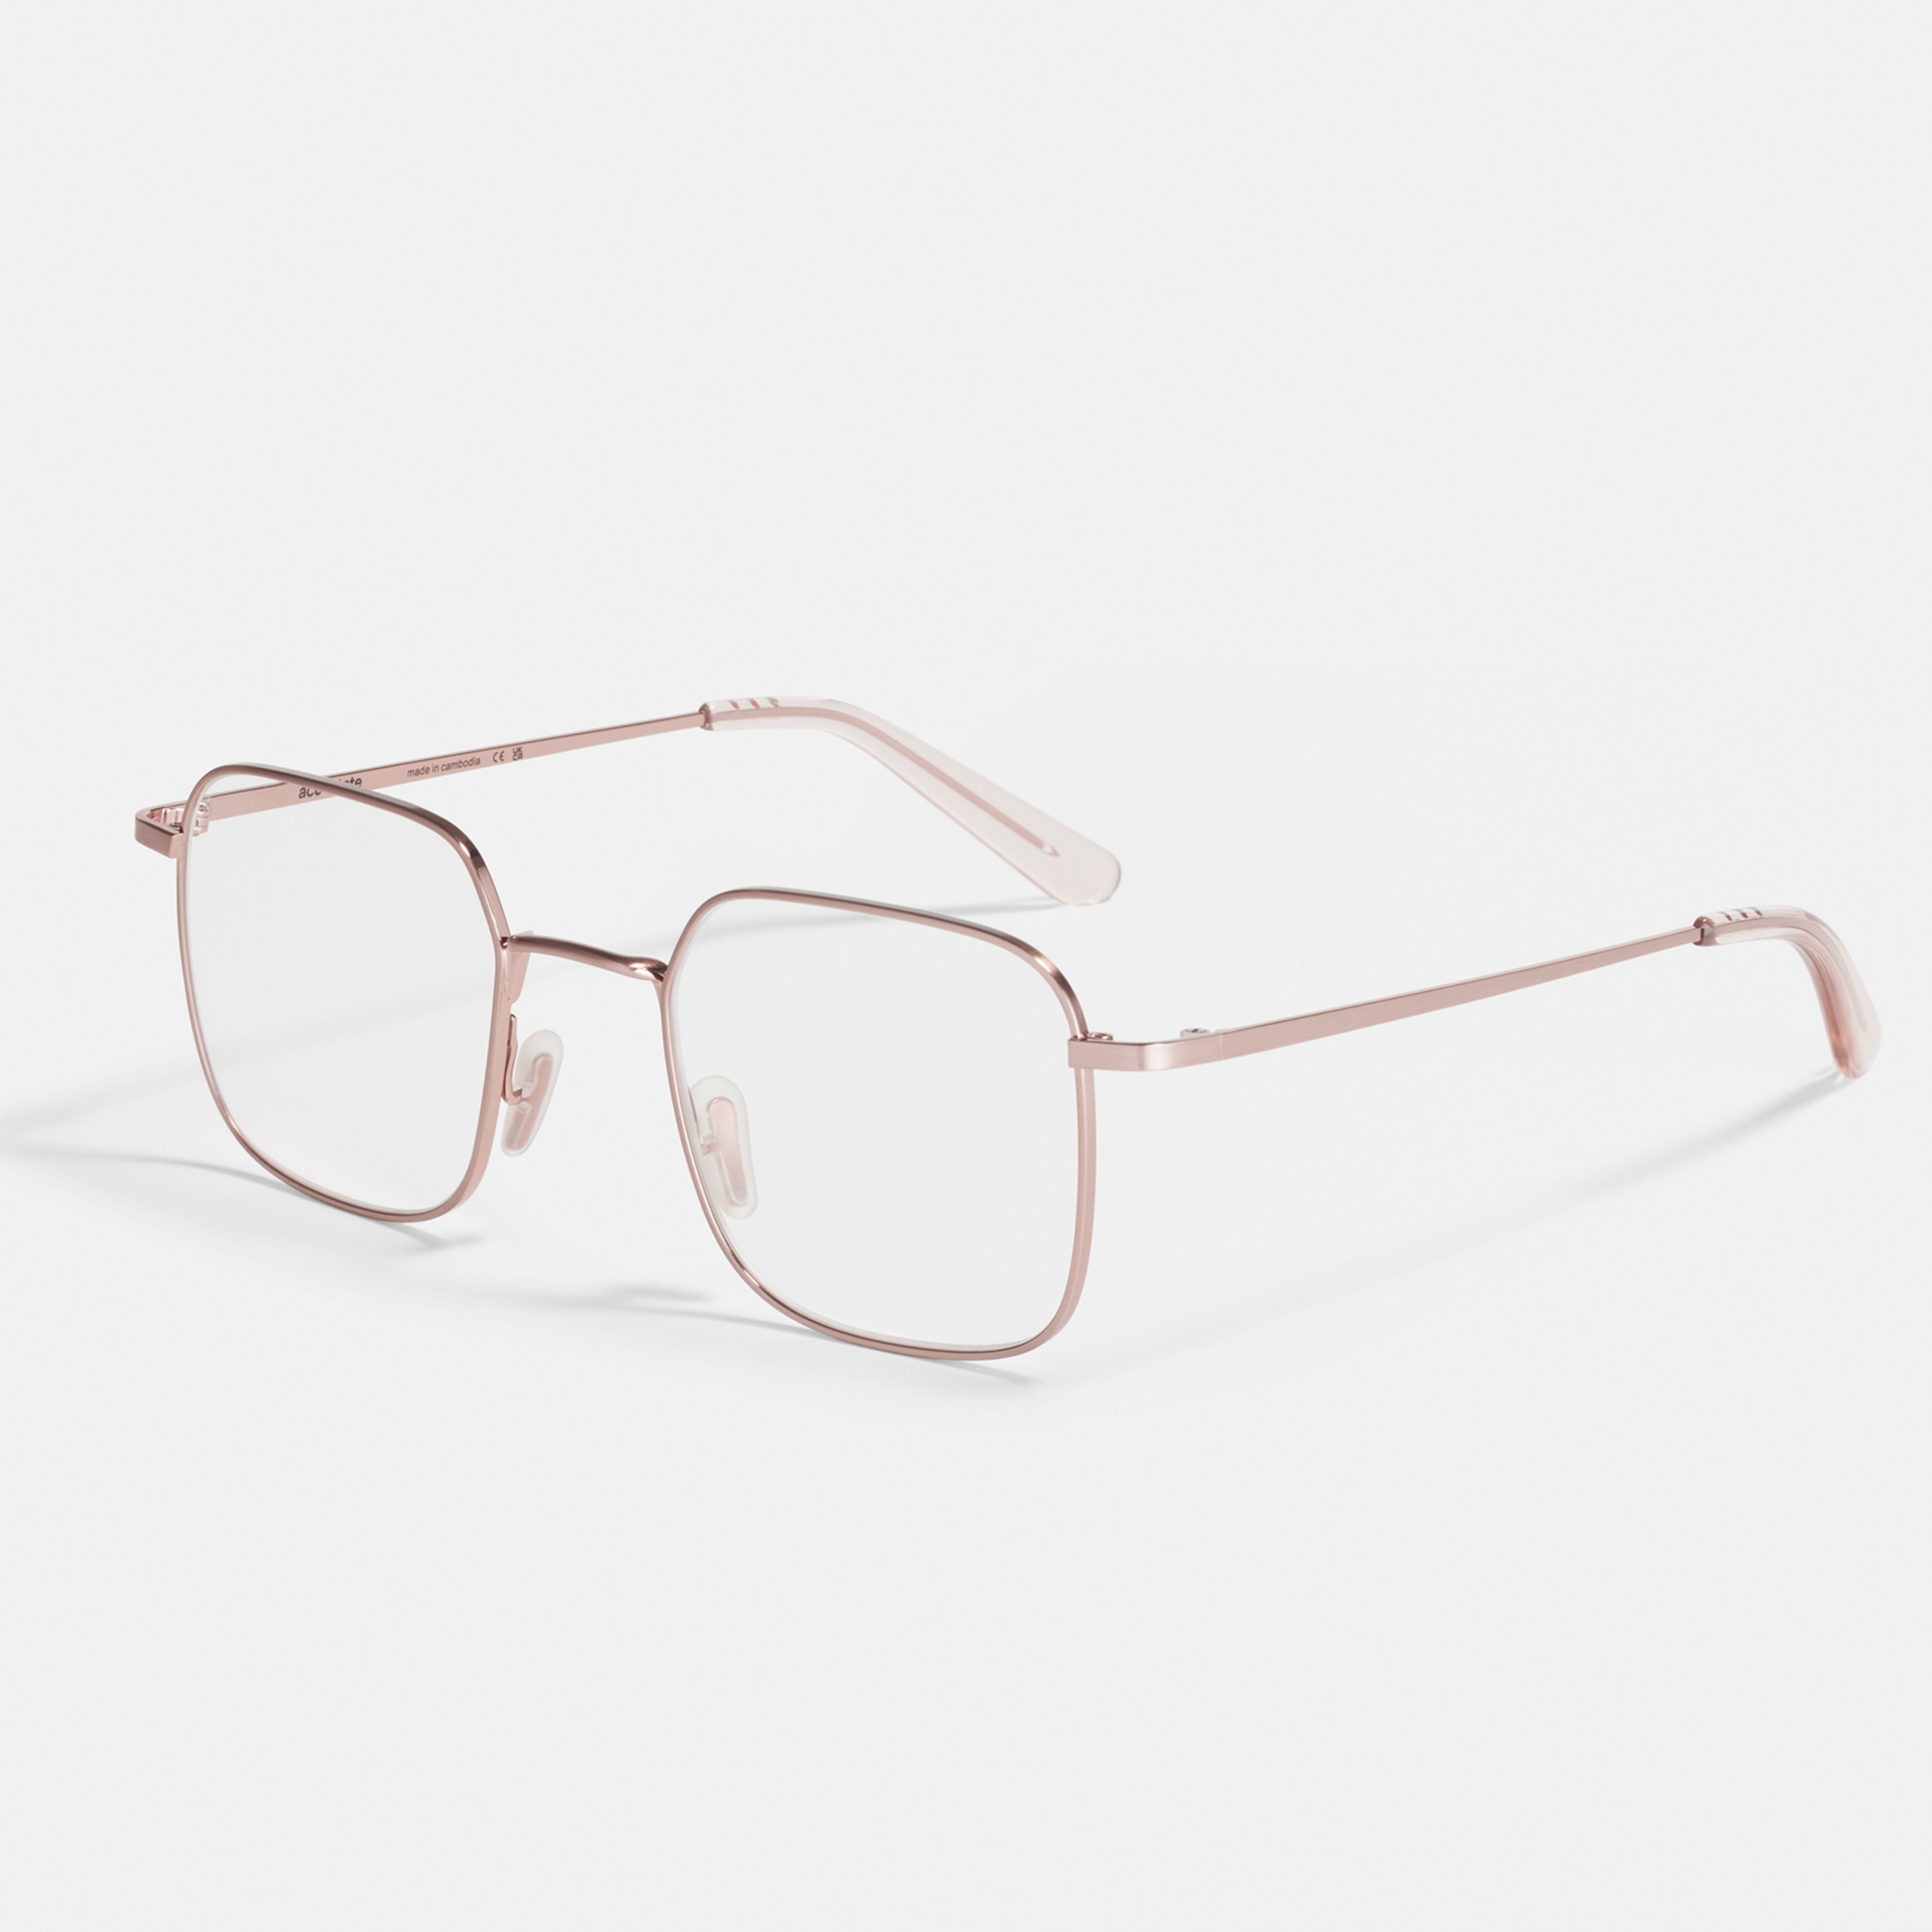 Ace & Tate Glasses |  Metal in gold,, Pink